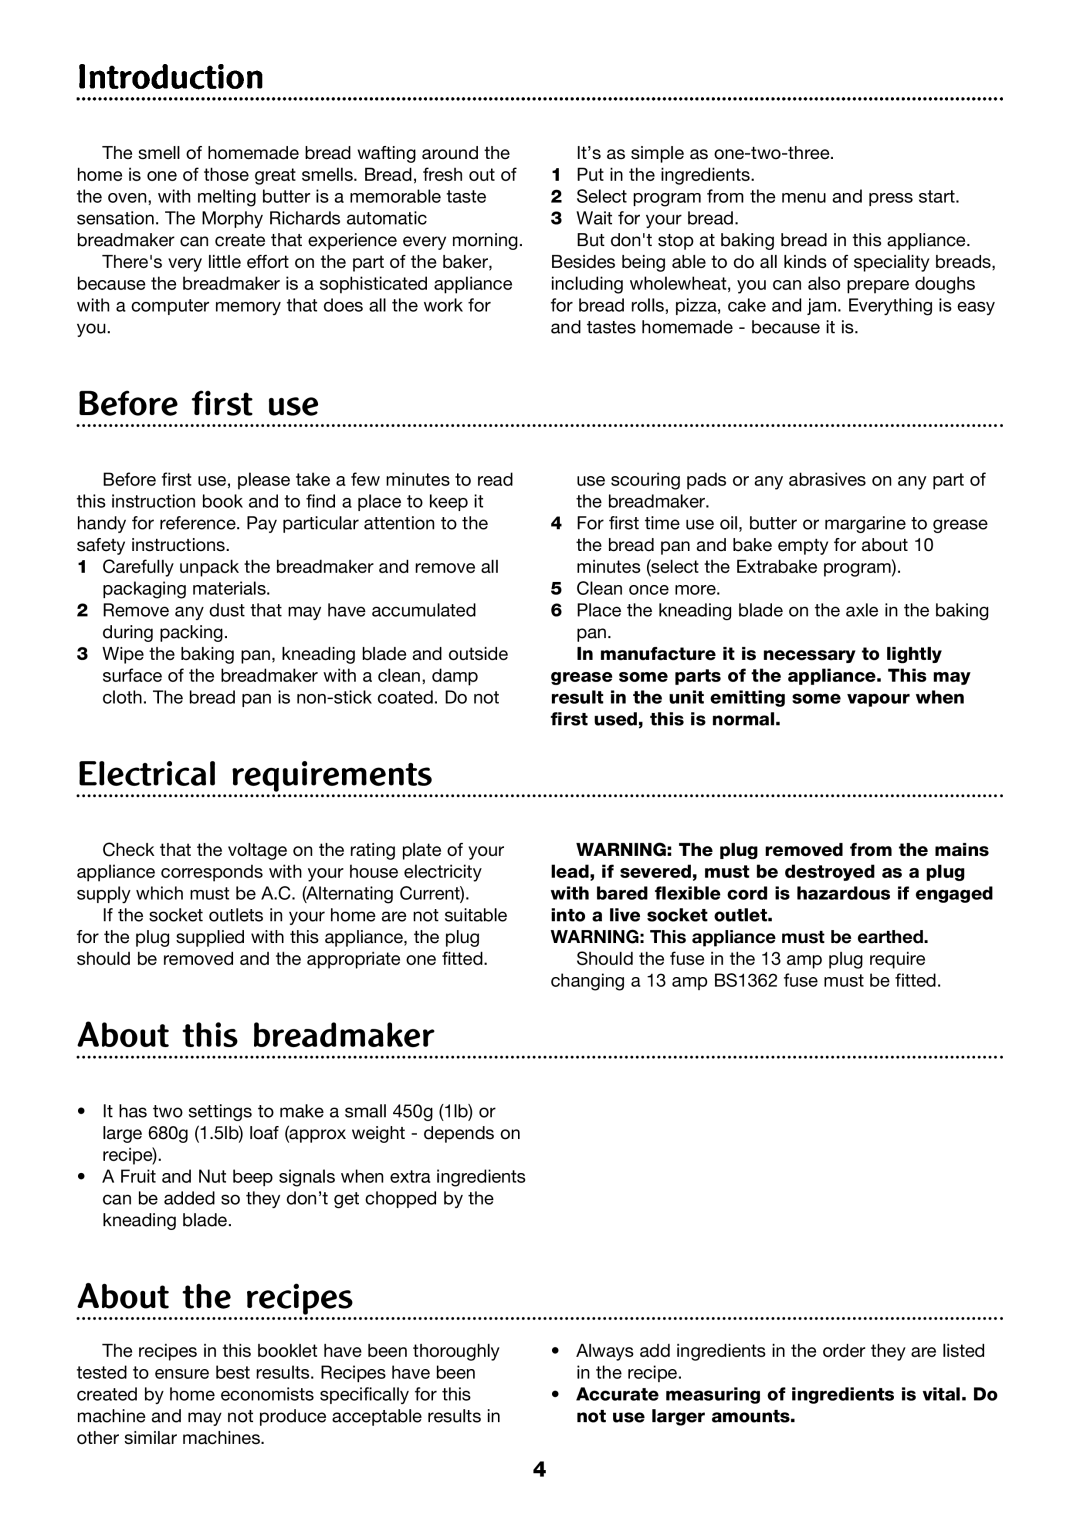 Morphy Richards Compact breadmaker manual Introduction, Before first use, Electrical requirements, About this breadmaker 